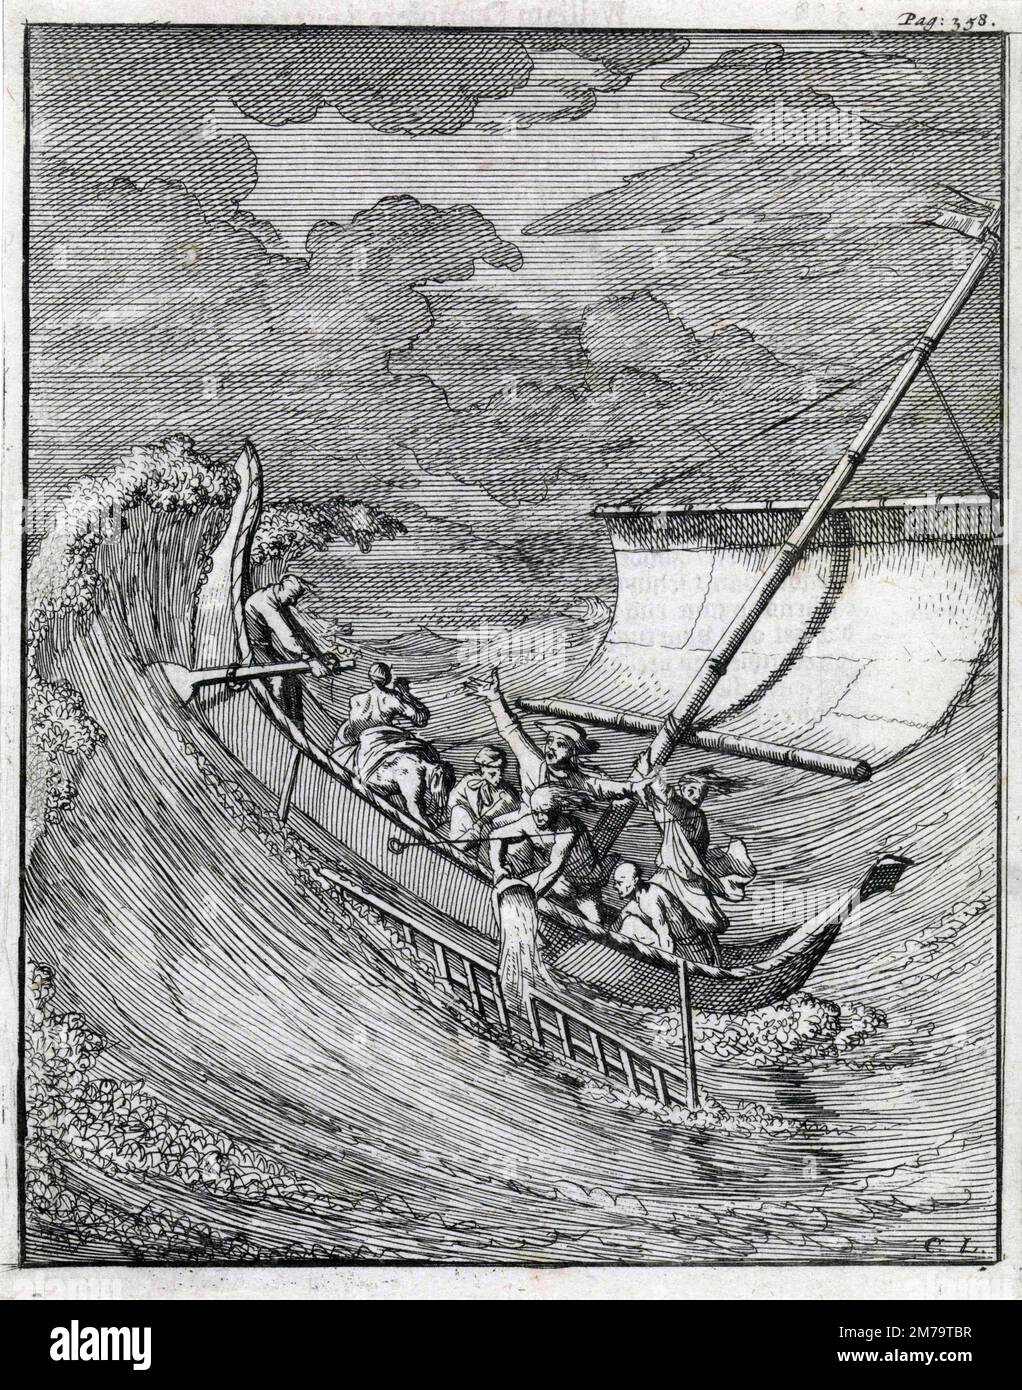 Engraving of Dampier's encounter with the storm off Aceh, in modern-day Indonesia, by Caspar Luyken. William Dampier, English explorer, pirate, privateer, navigator, and naturalist Stock Photo